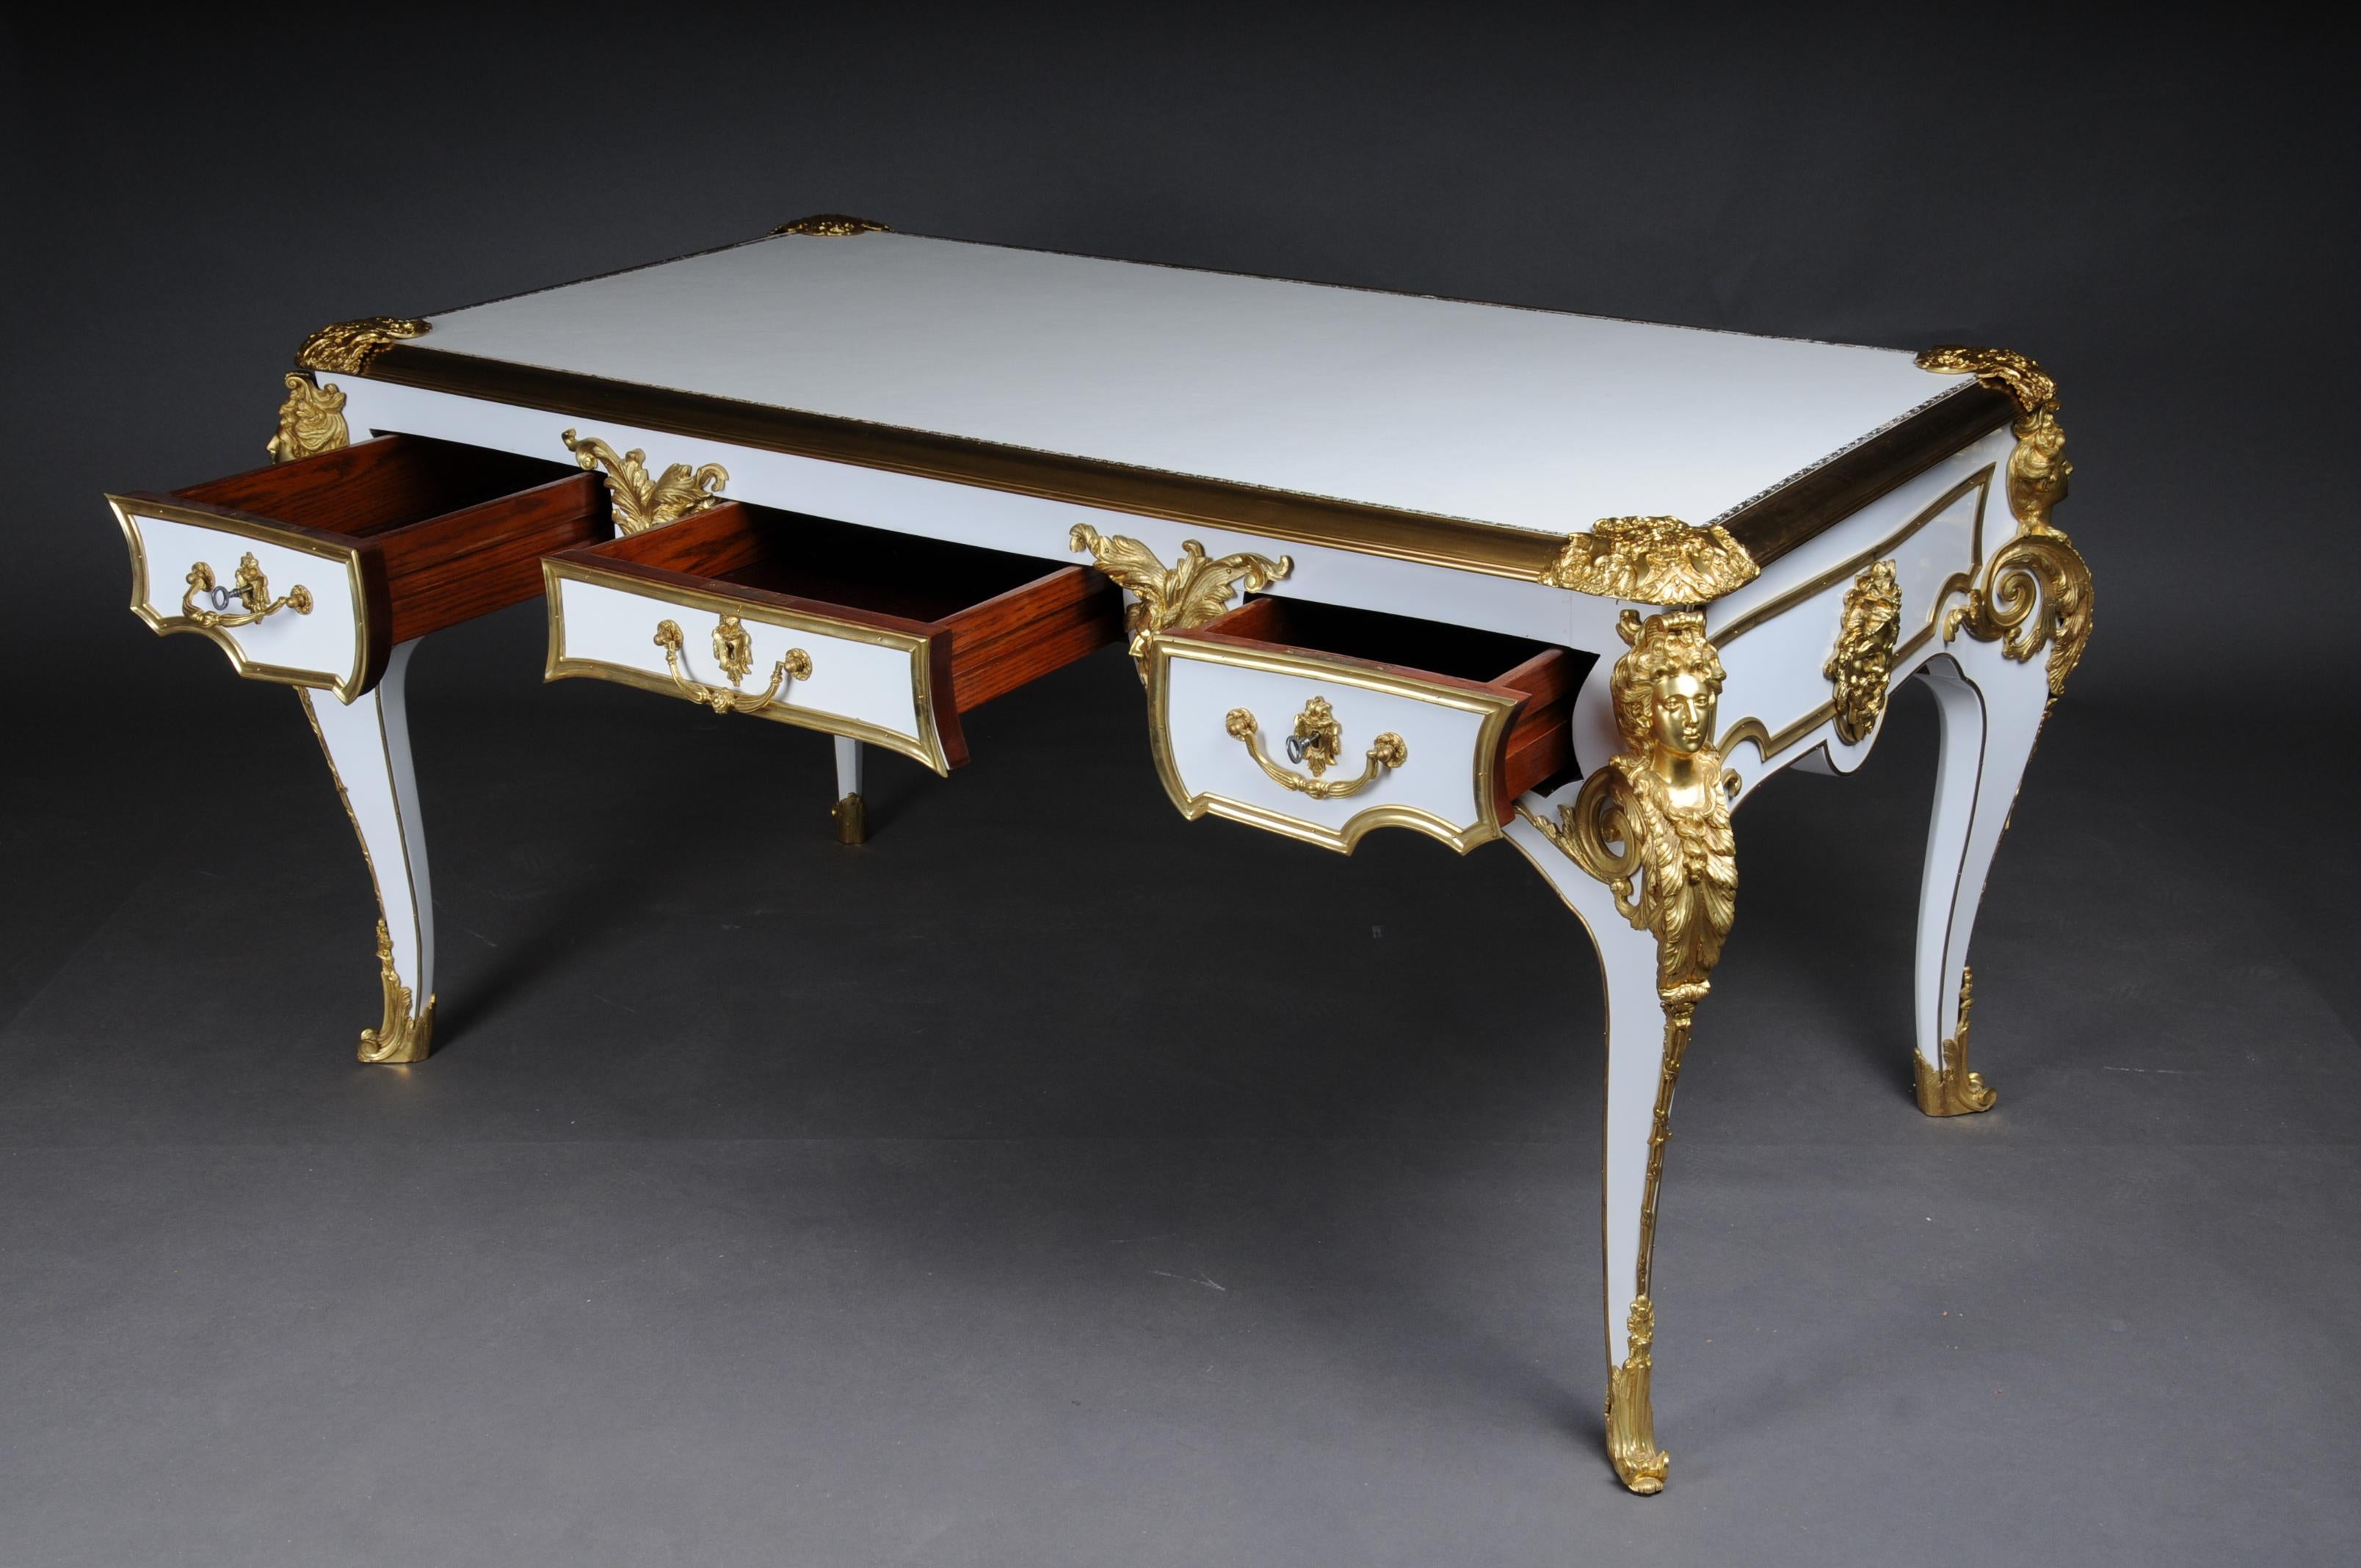 20th Century Bureau Plat/Desk high gloss white with gold after C. Boulle For Sale 3